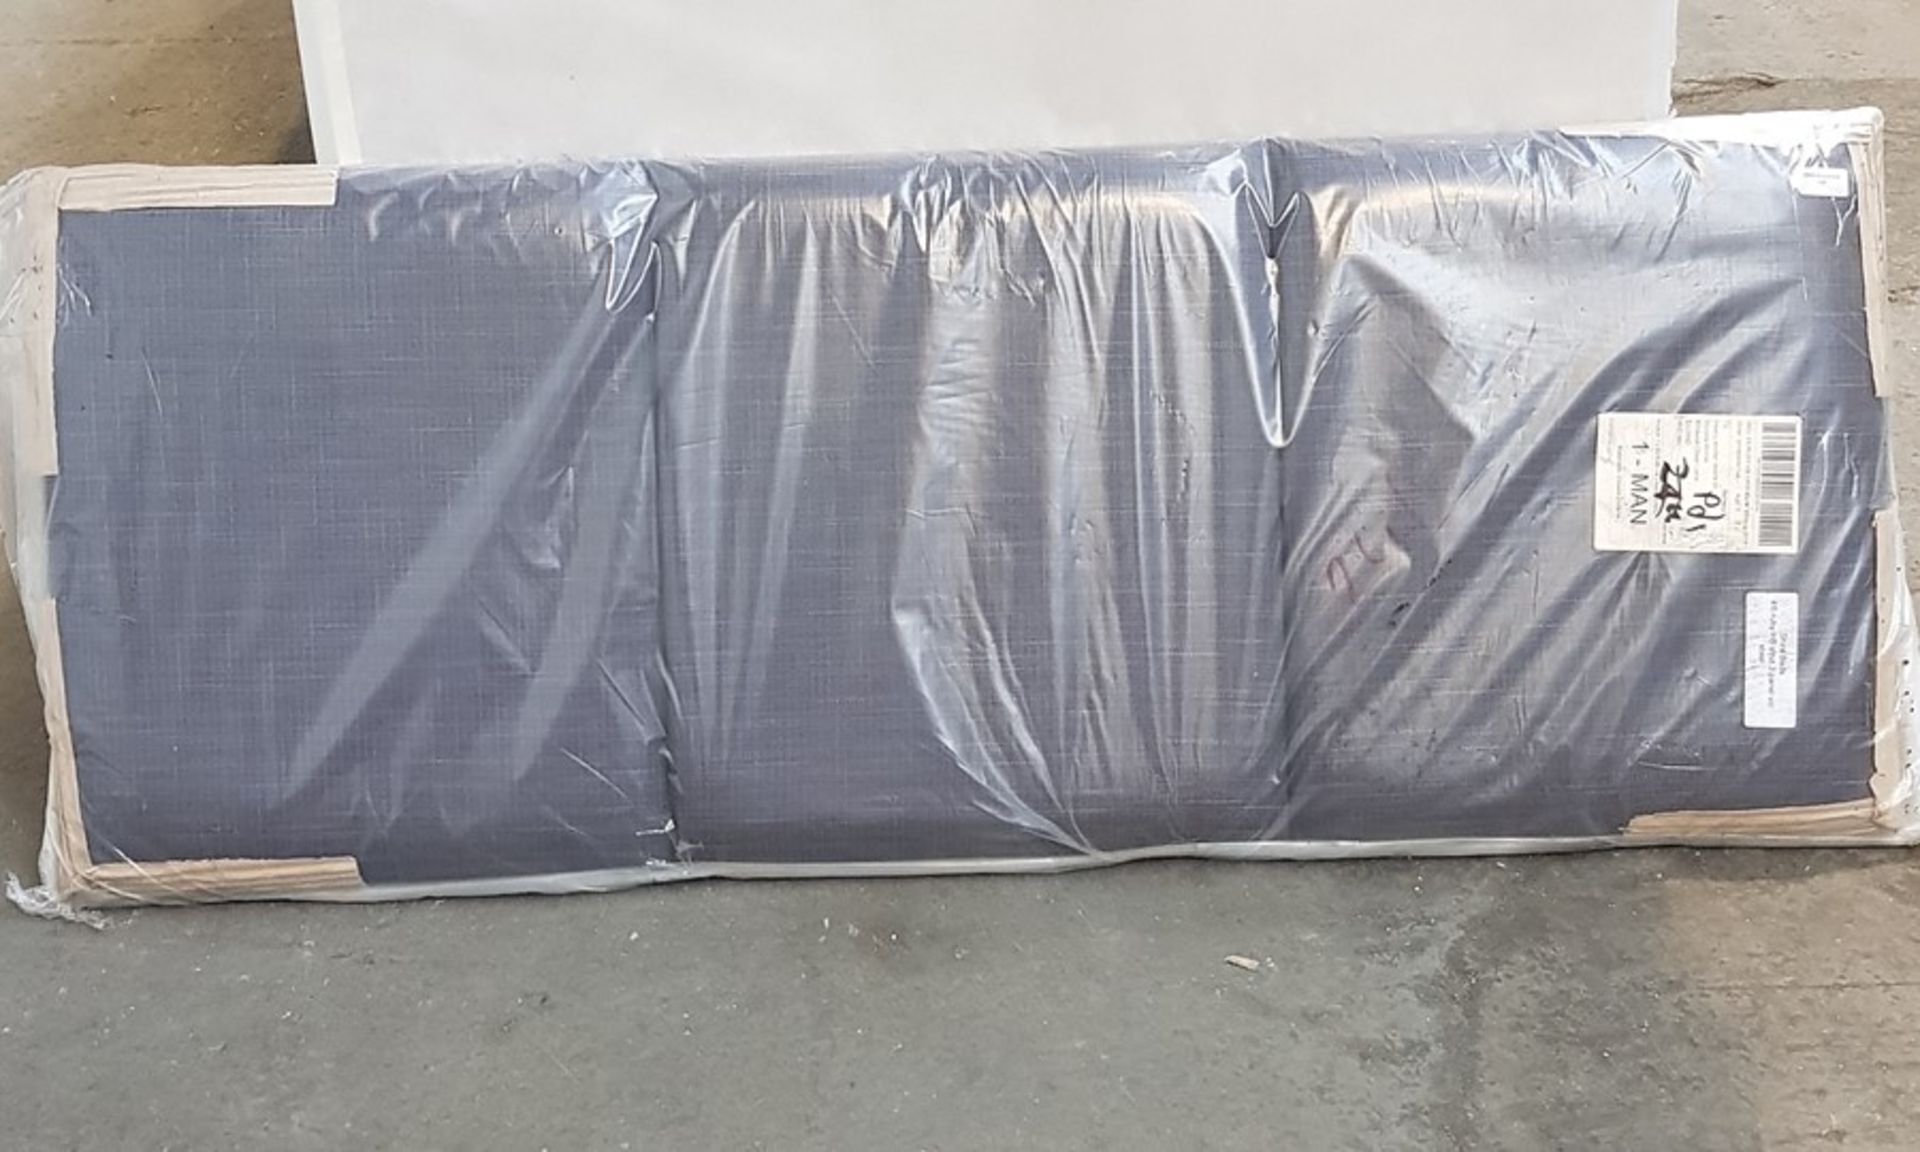 1 GRADE A BAGGED 135CM RUBY HEADBOARD IN BLACK WEAVE (VIEWING HIGHLY RECOMMENDED)